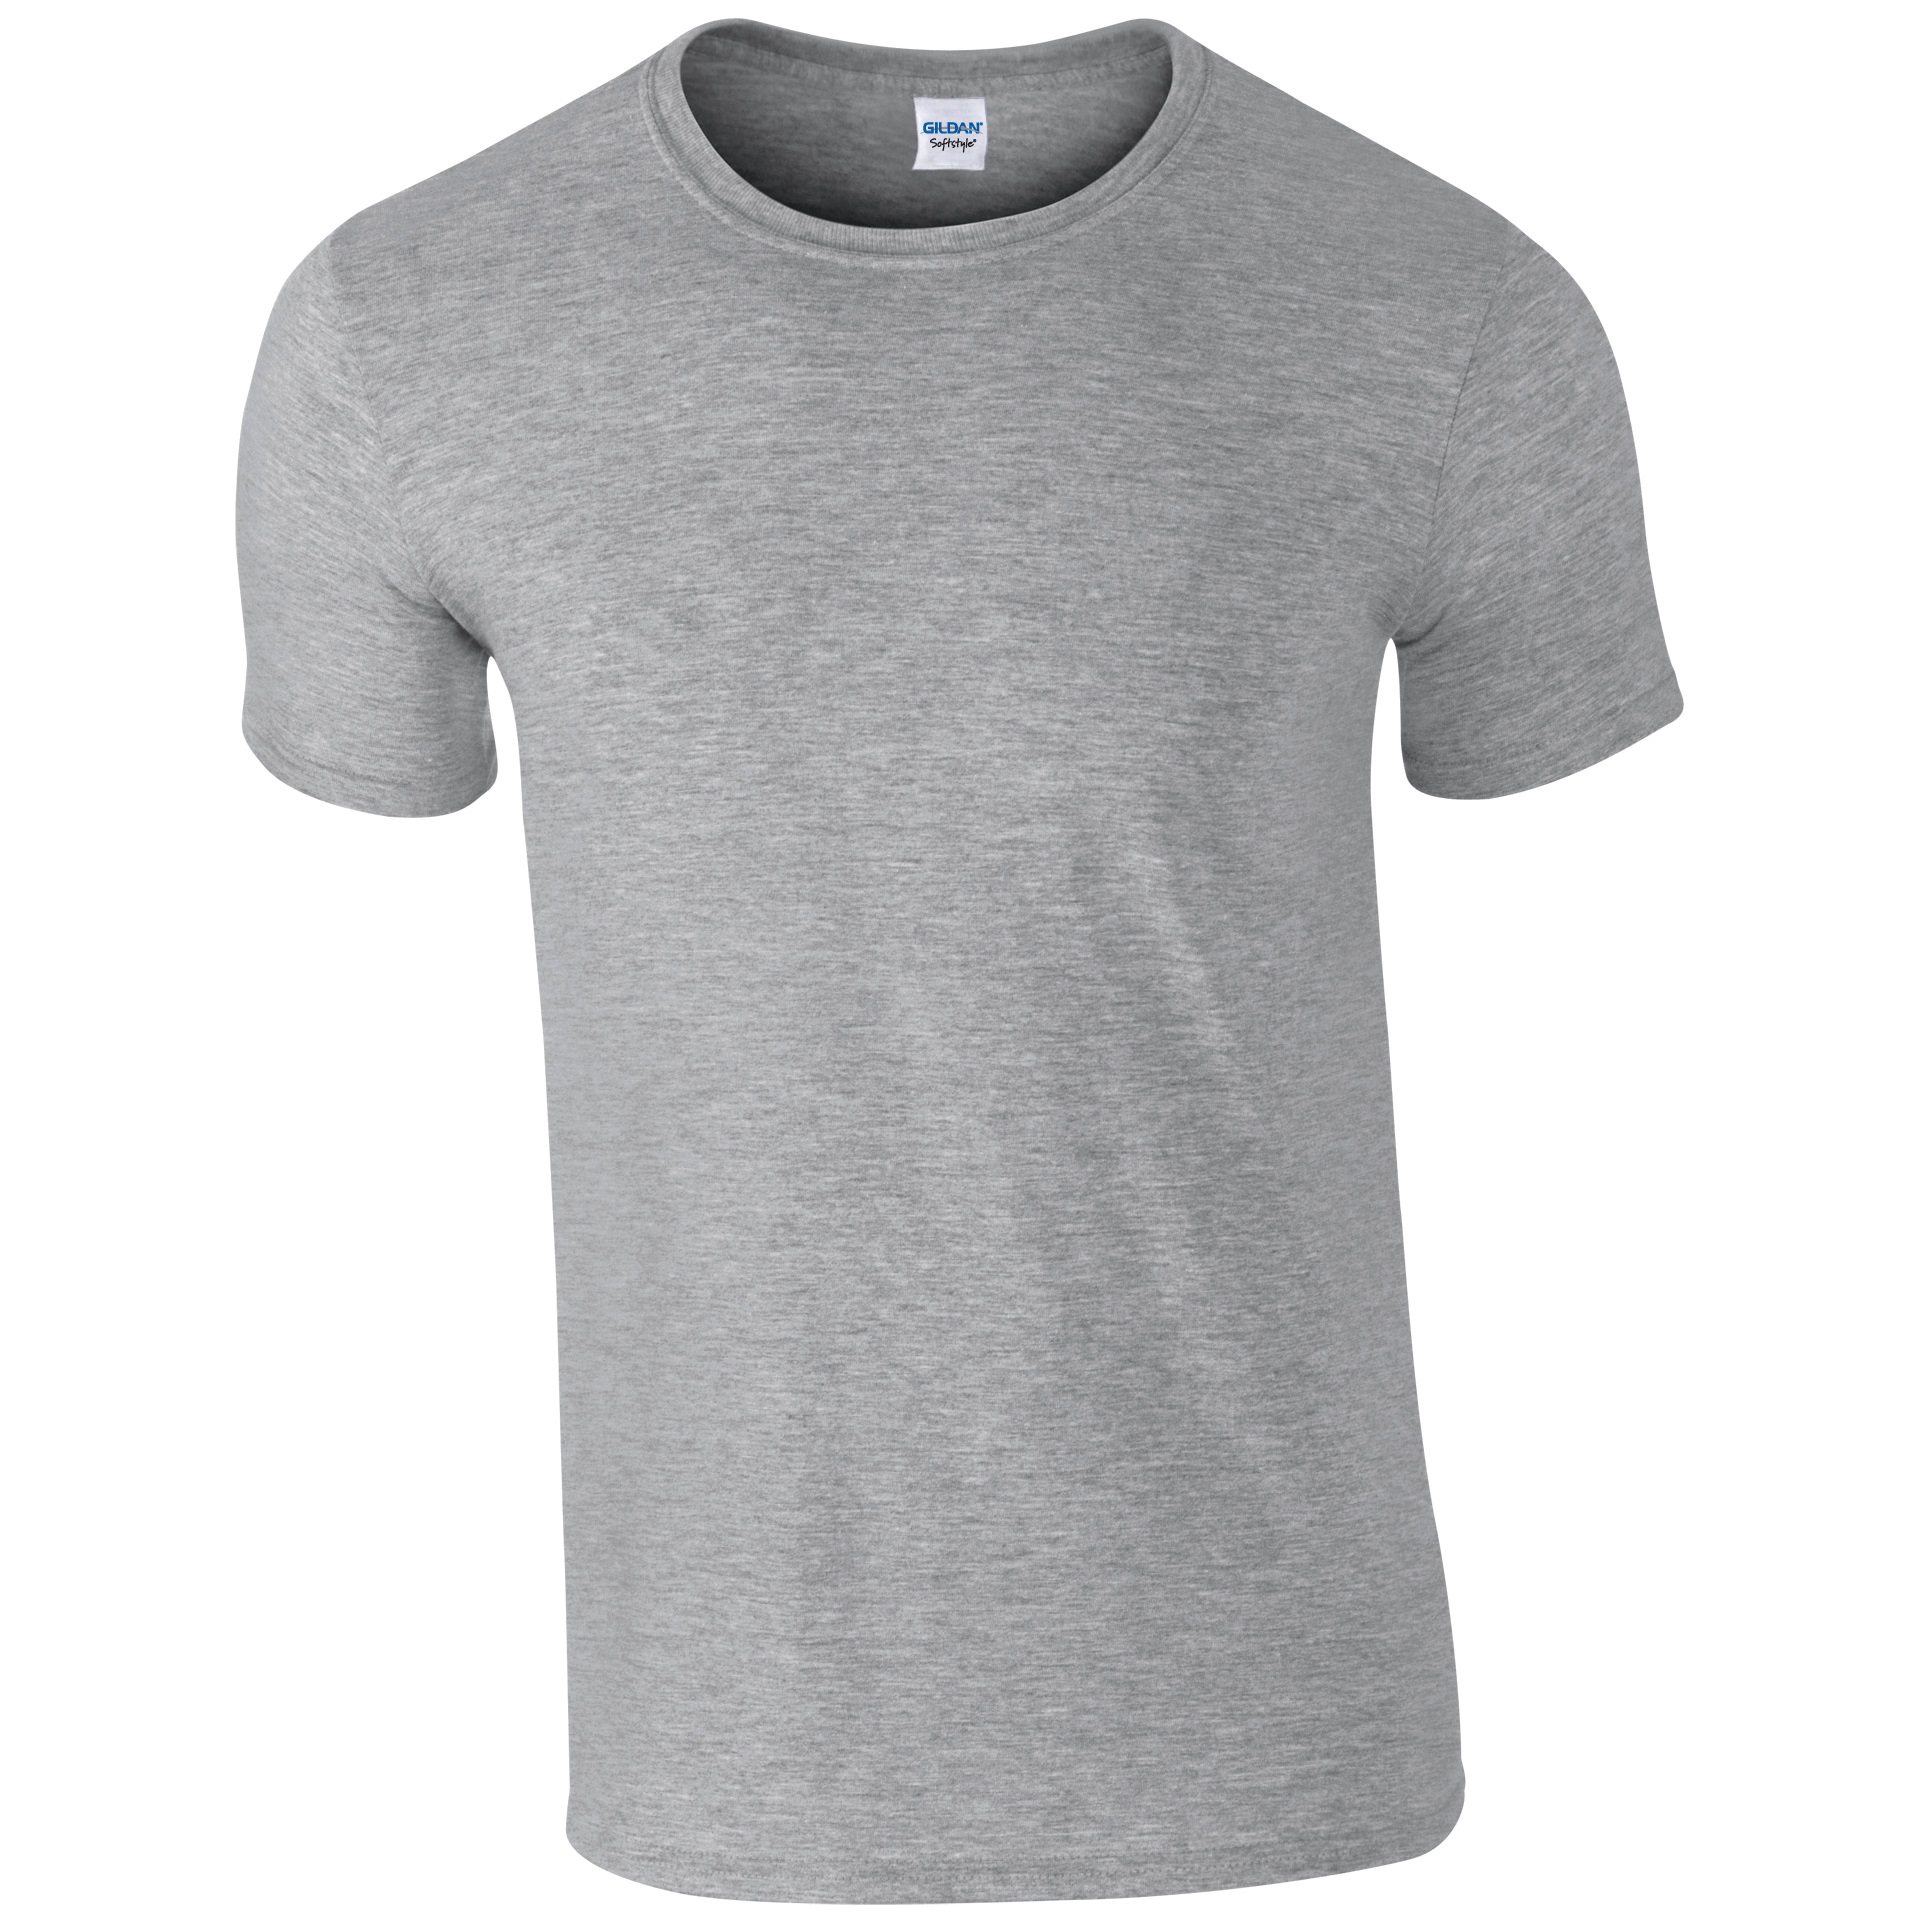 GD001 Softstyle™ adult ringspun t-shirt